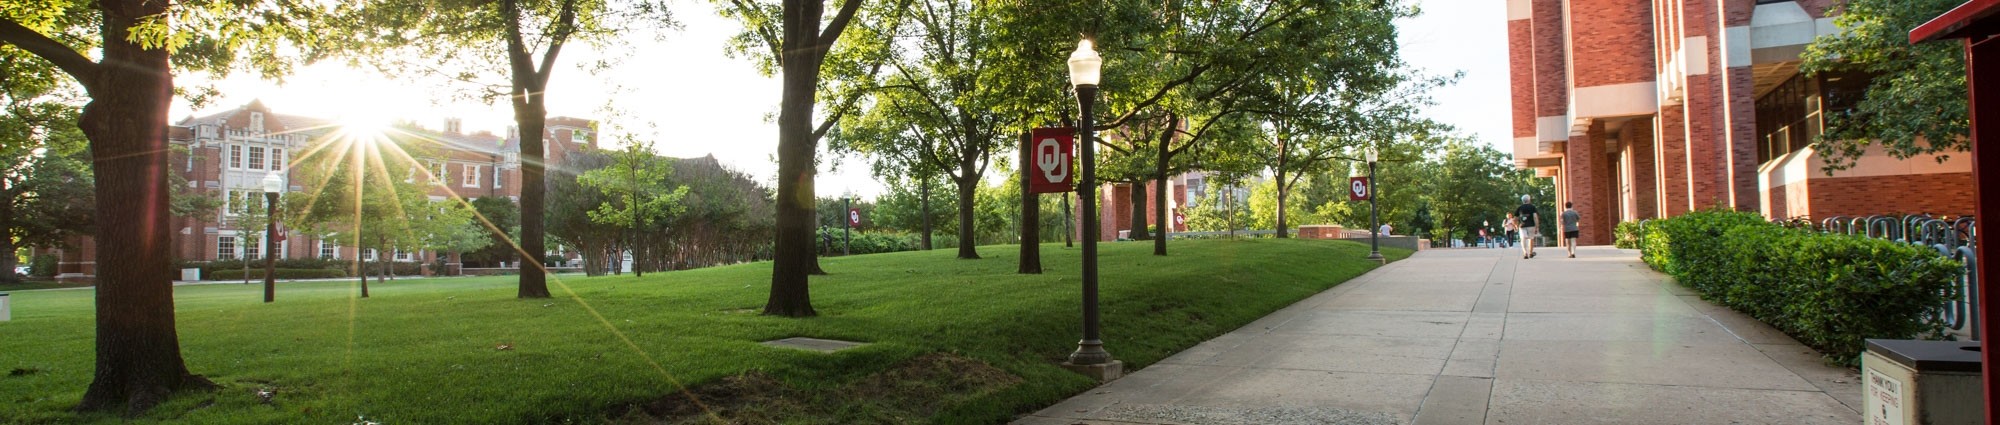 Bizzel Library, Ellison Hall, and the OU Clock Tower with OU flag.